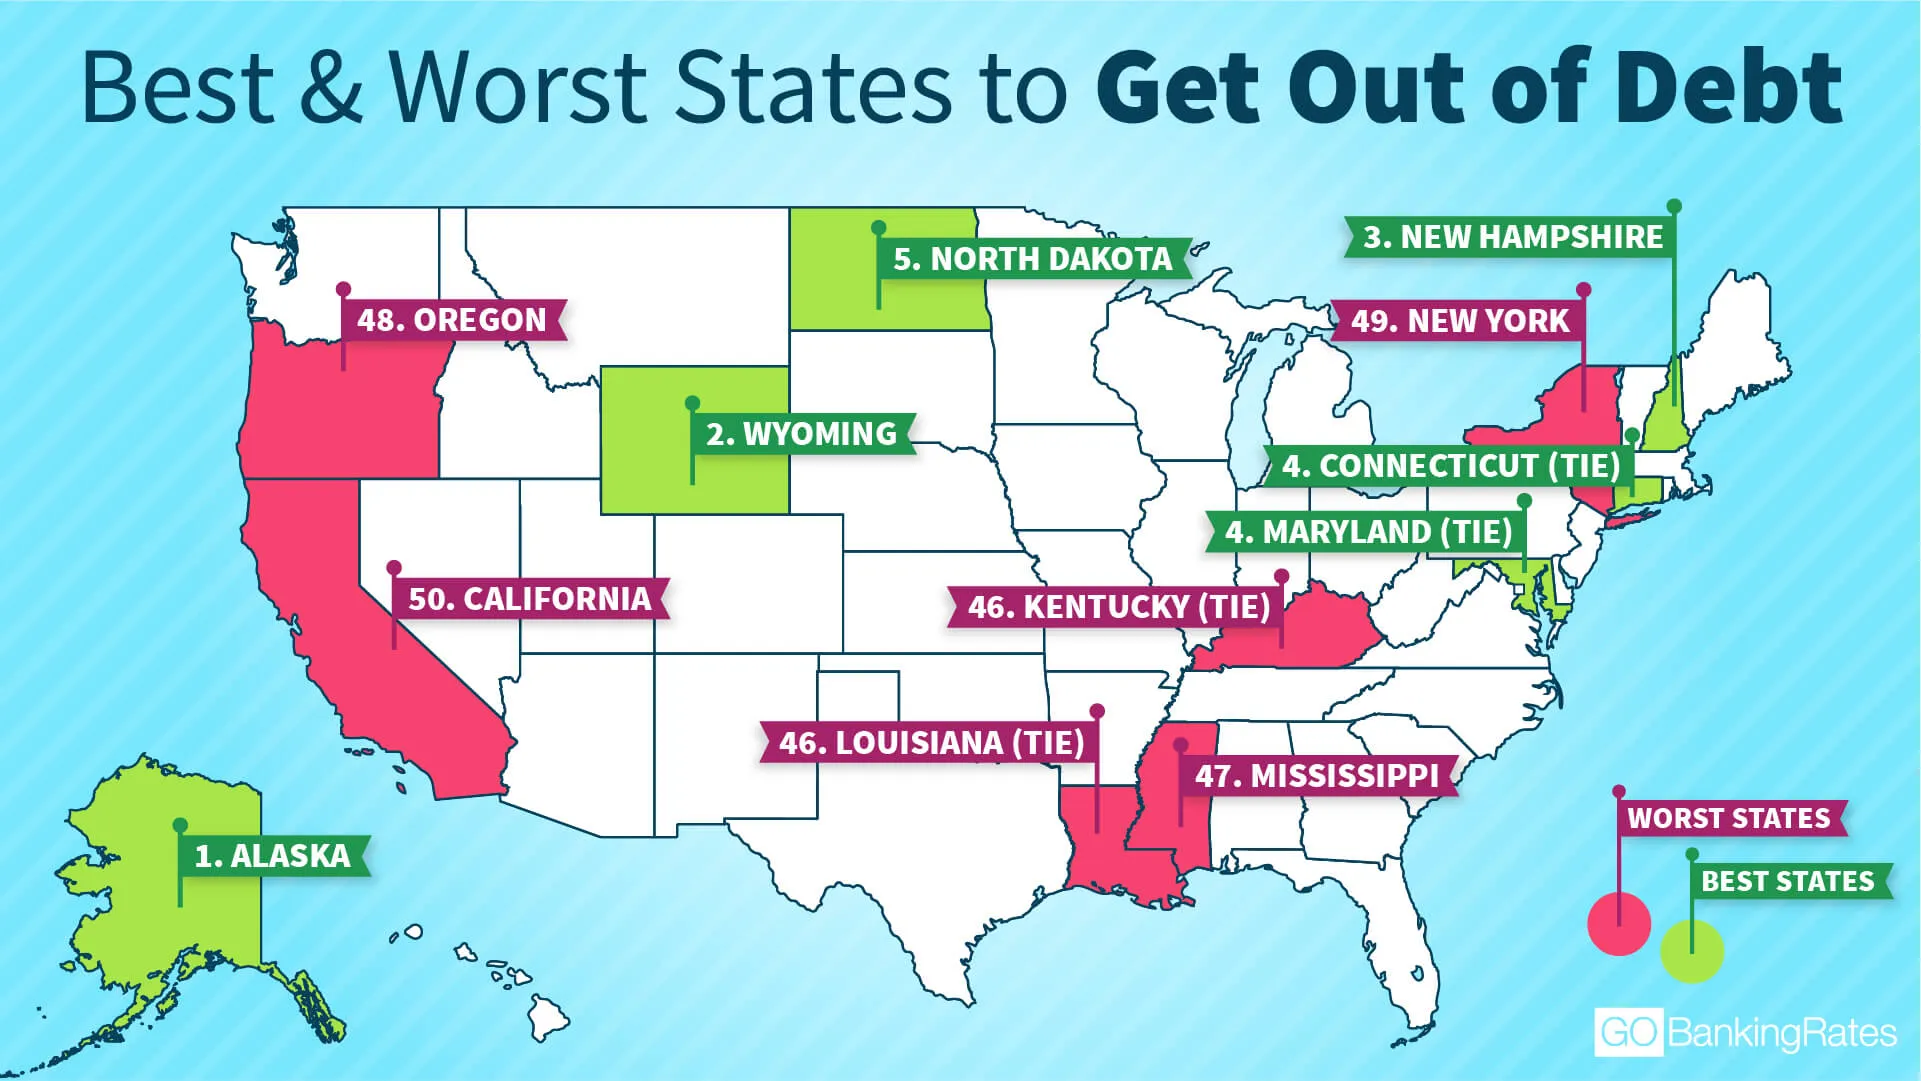 Best and Worst States to Get Out of Debt